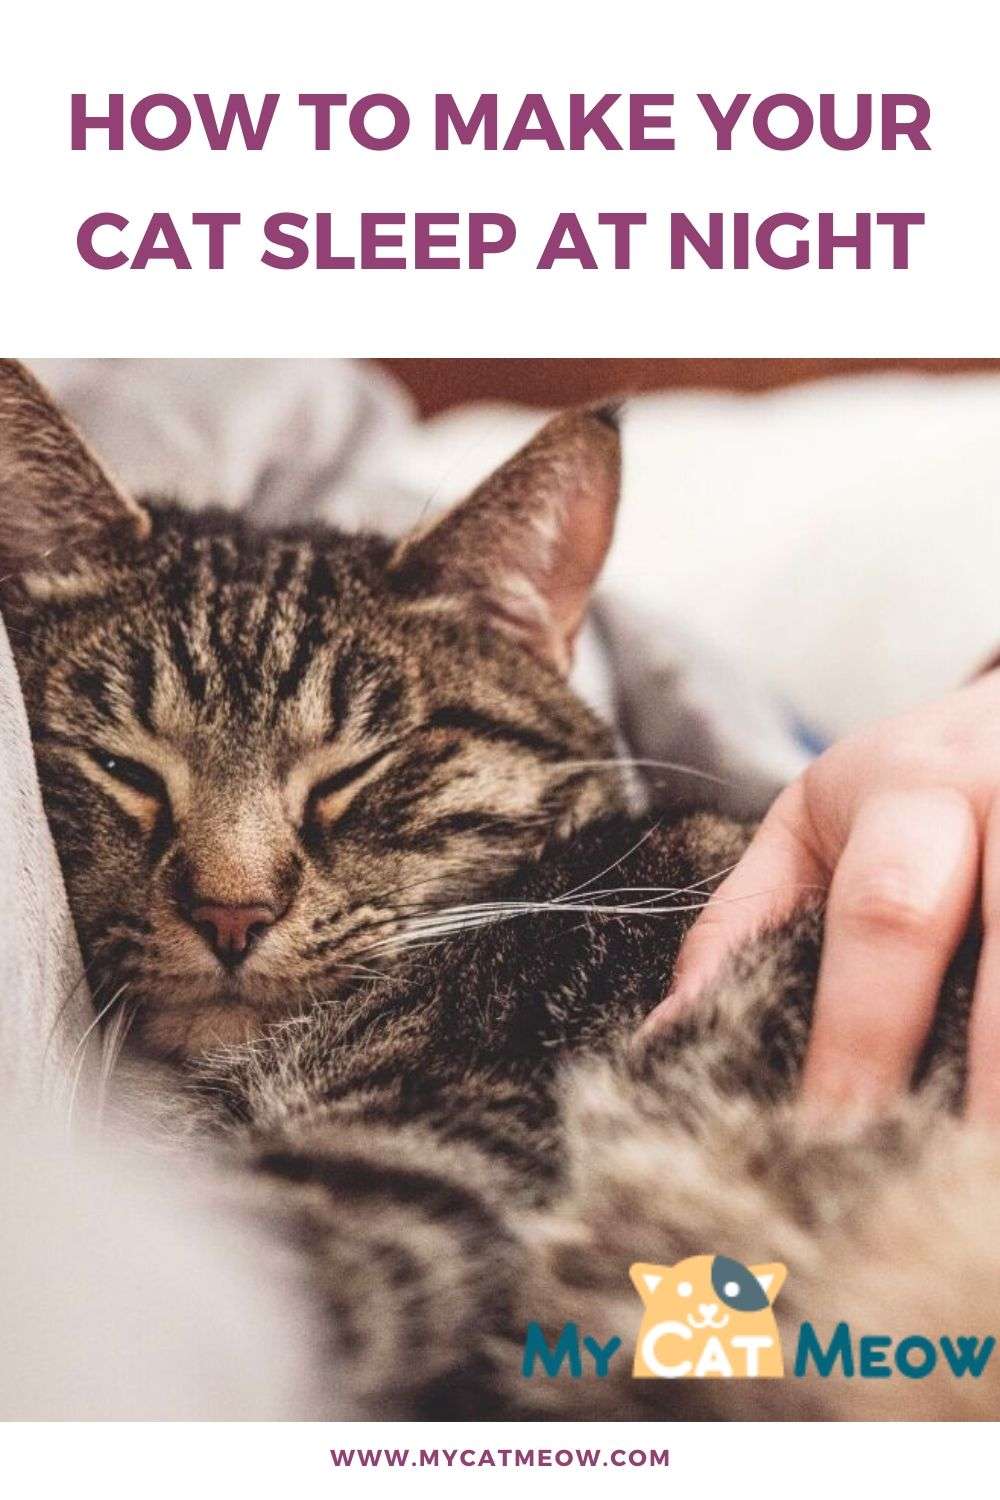 14 Effective Ways to make your Cat Sleep at Night